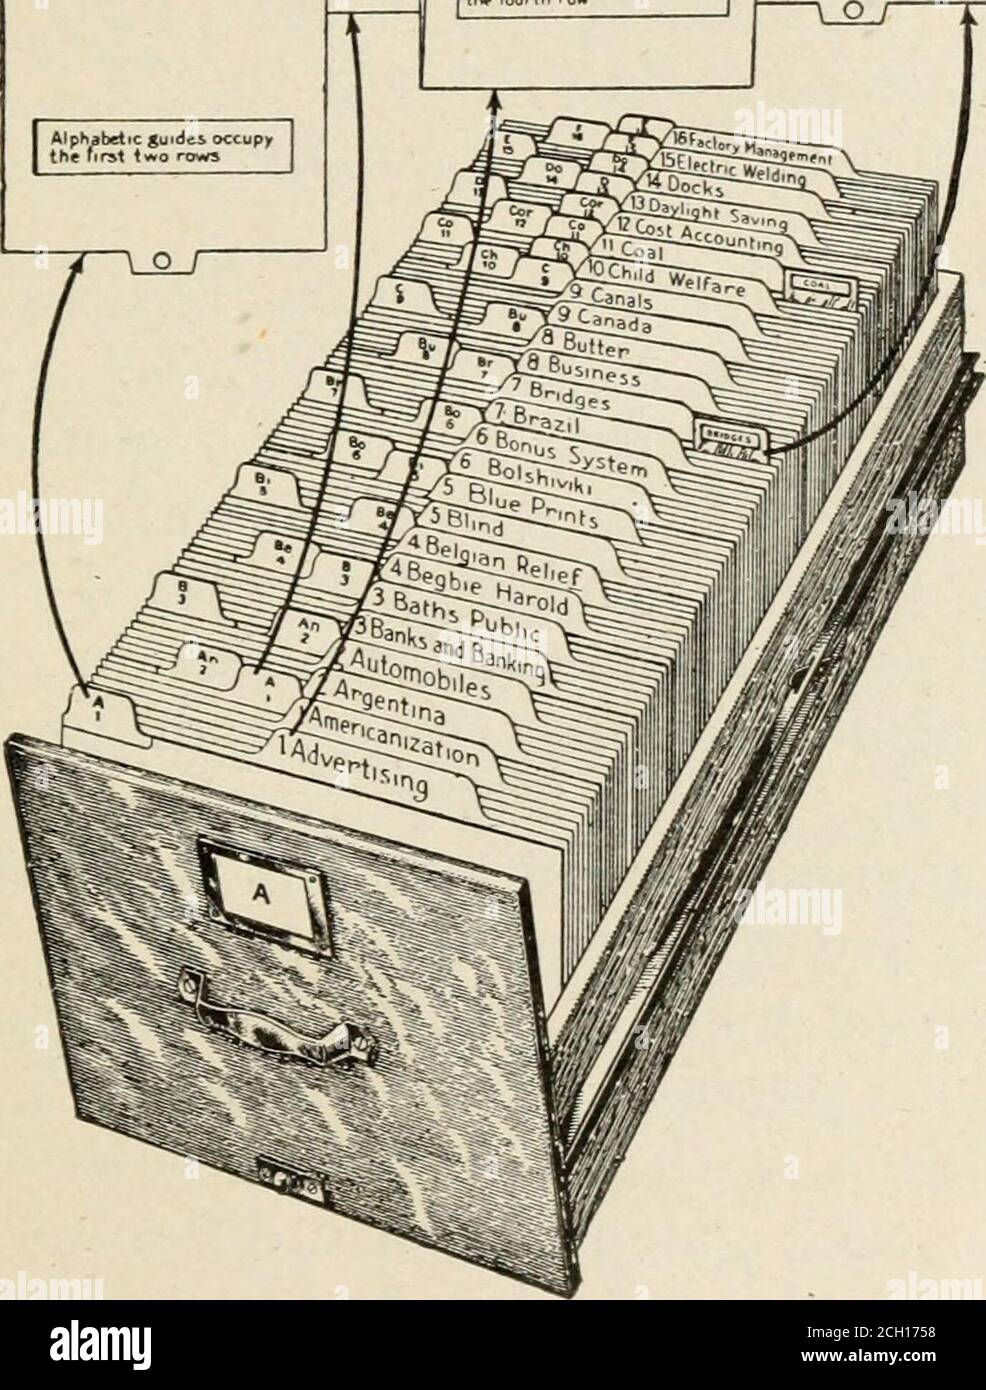 Pamphlets and clippings in a business library . / Fig. 7. Information file  made ap with straight edge pressboard folderswithout guides. Illustrates  alphabetic arrangement of subjects withCutter numbers. In a small